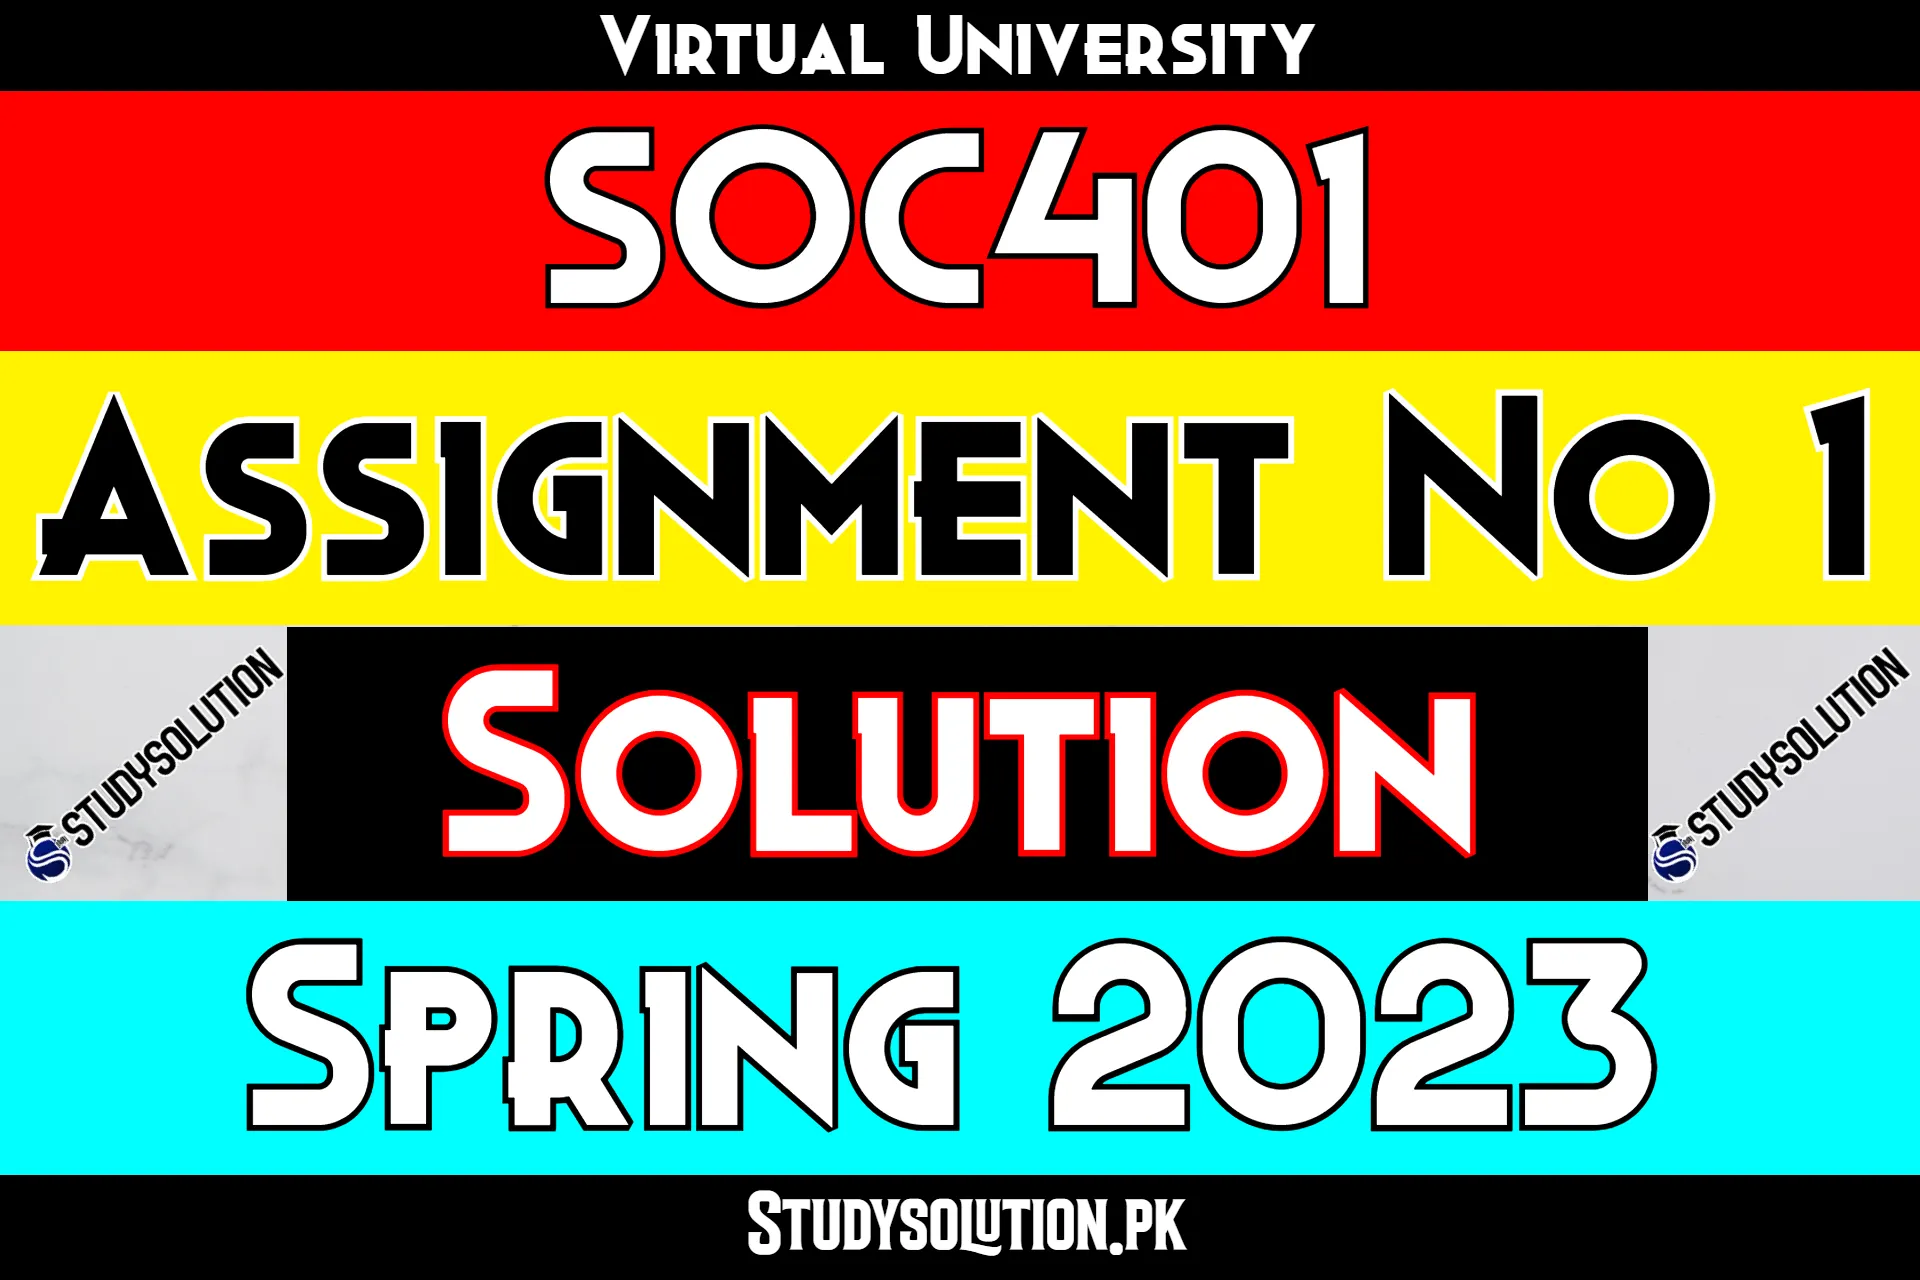 SOC401 Assignment No 1 Solution Spring 2023